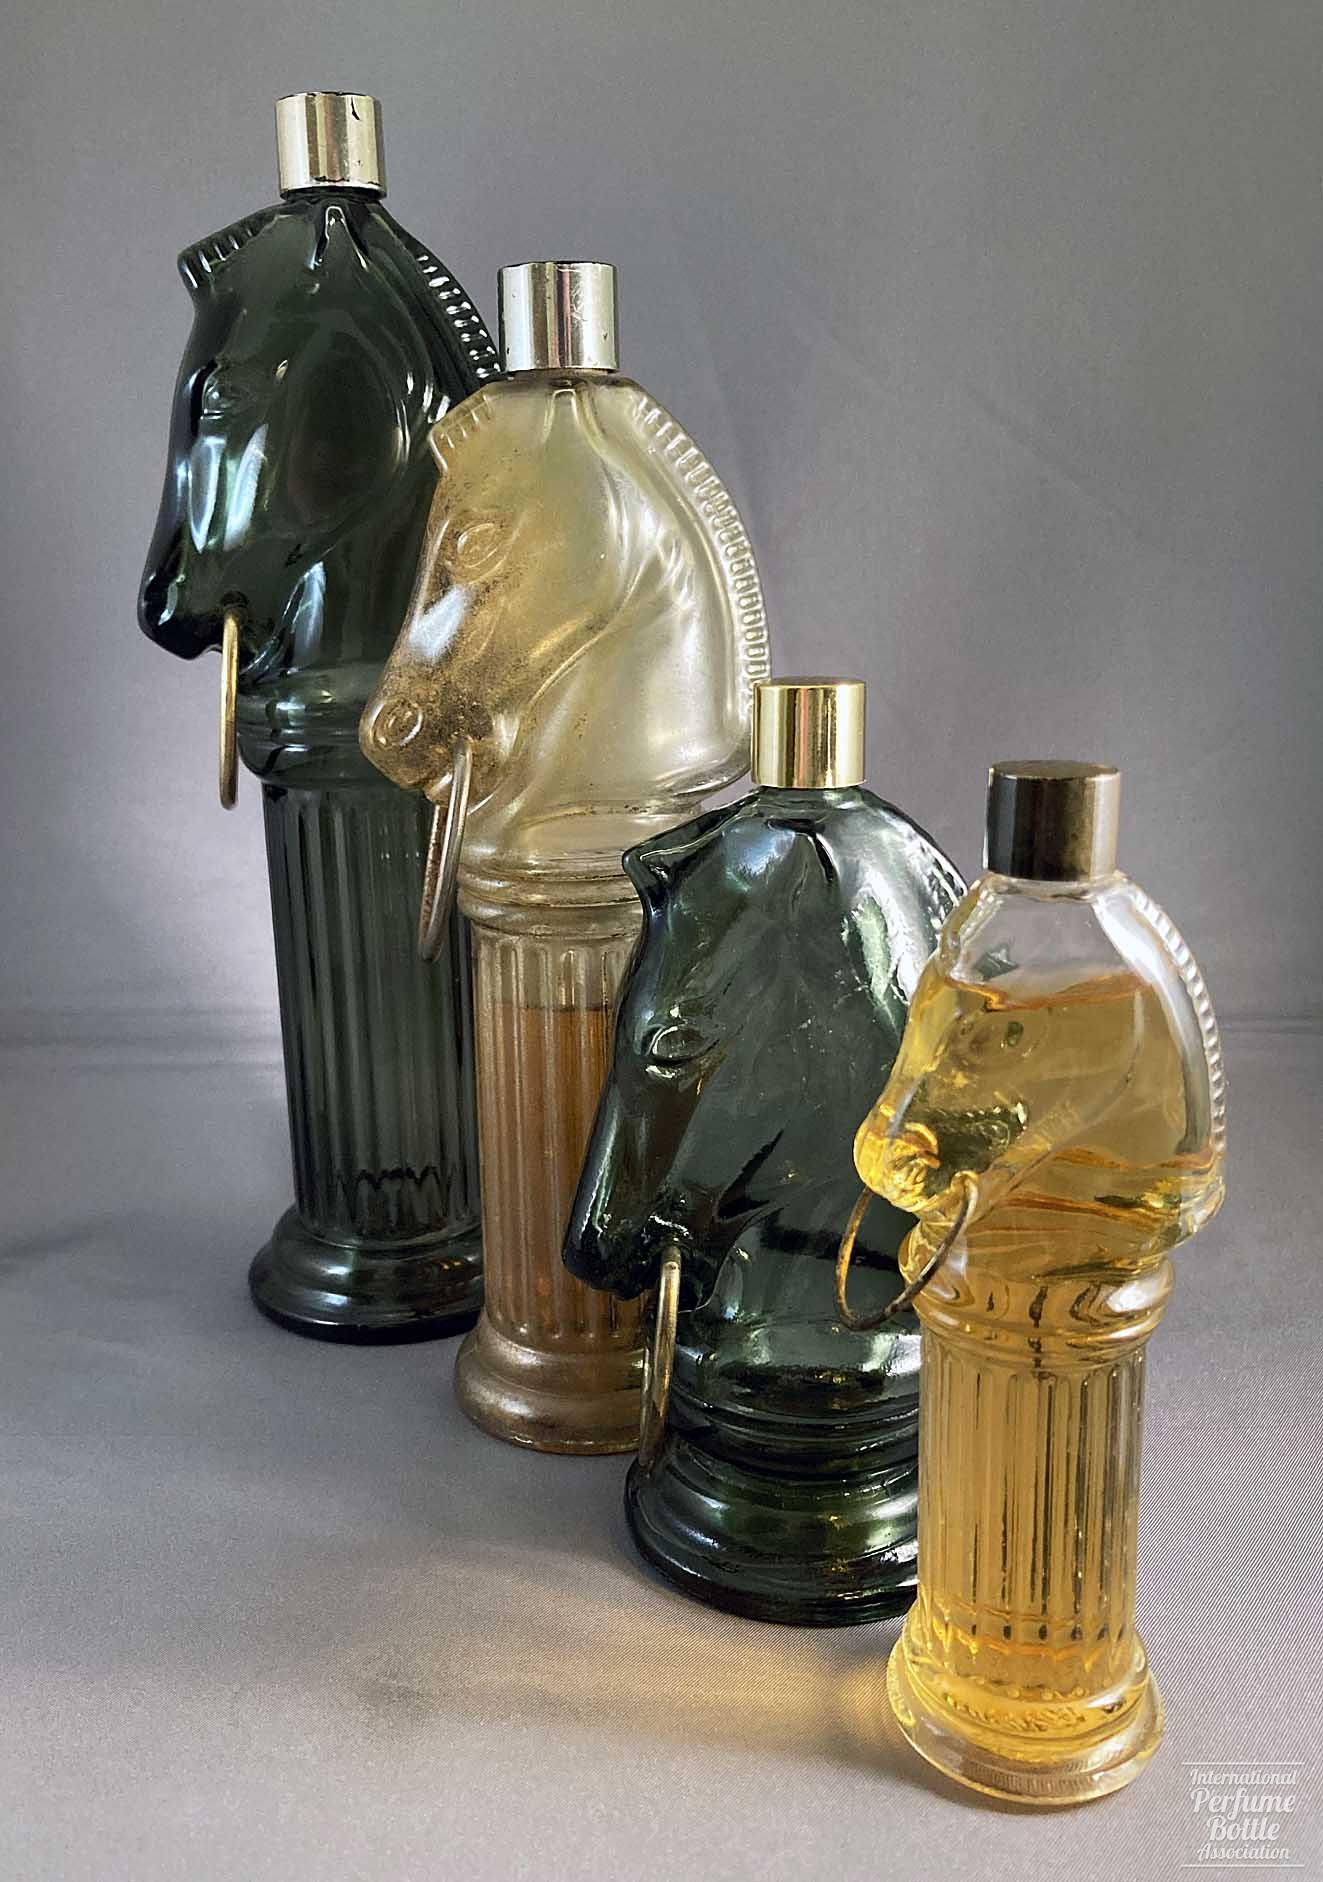 "Pony Post" and "Short Pony" Decanters by Avon